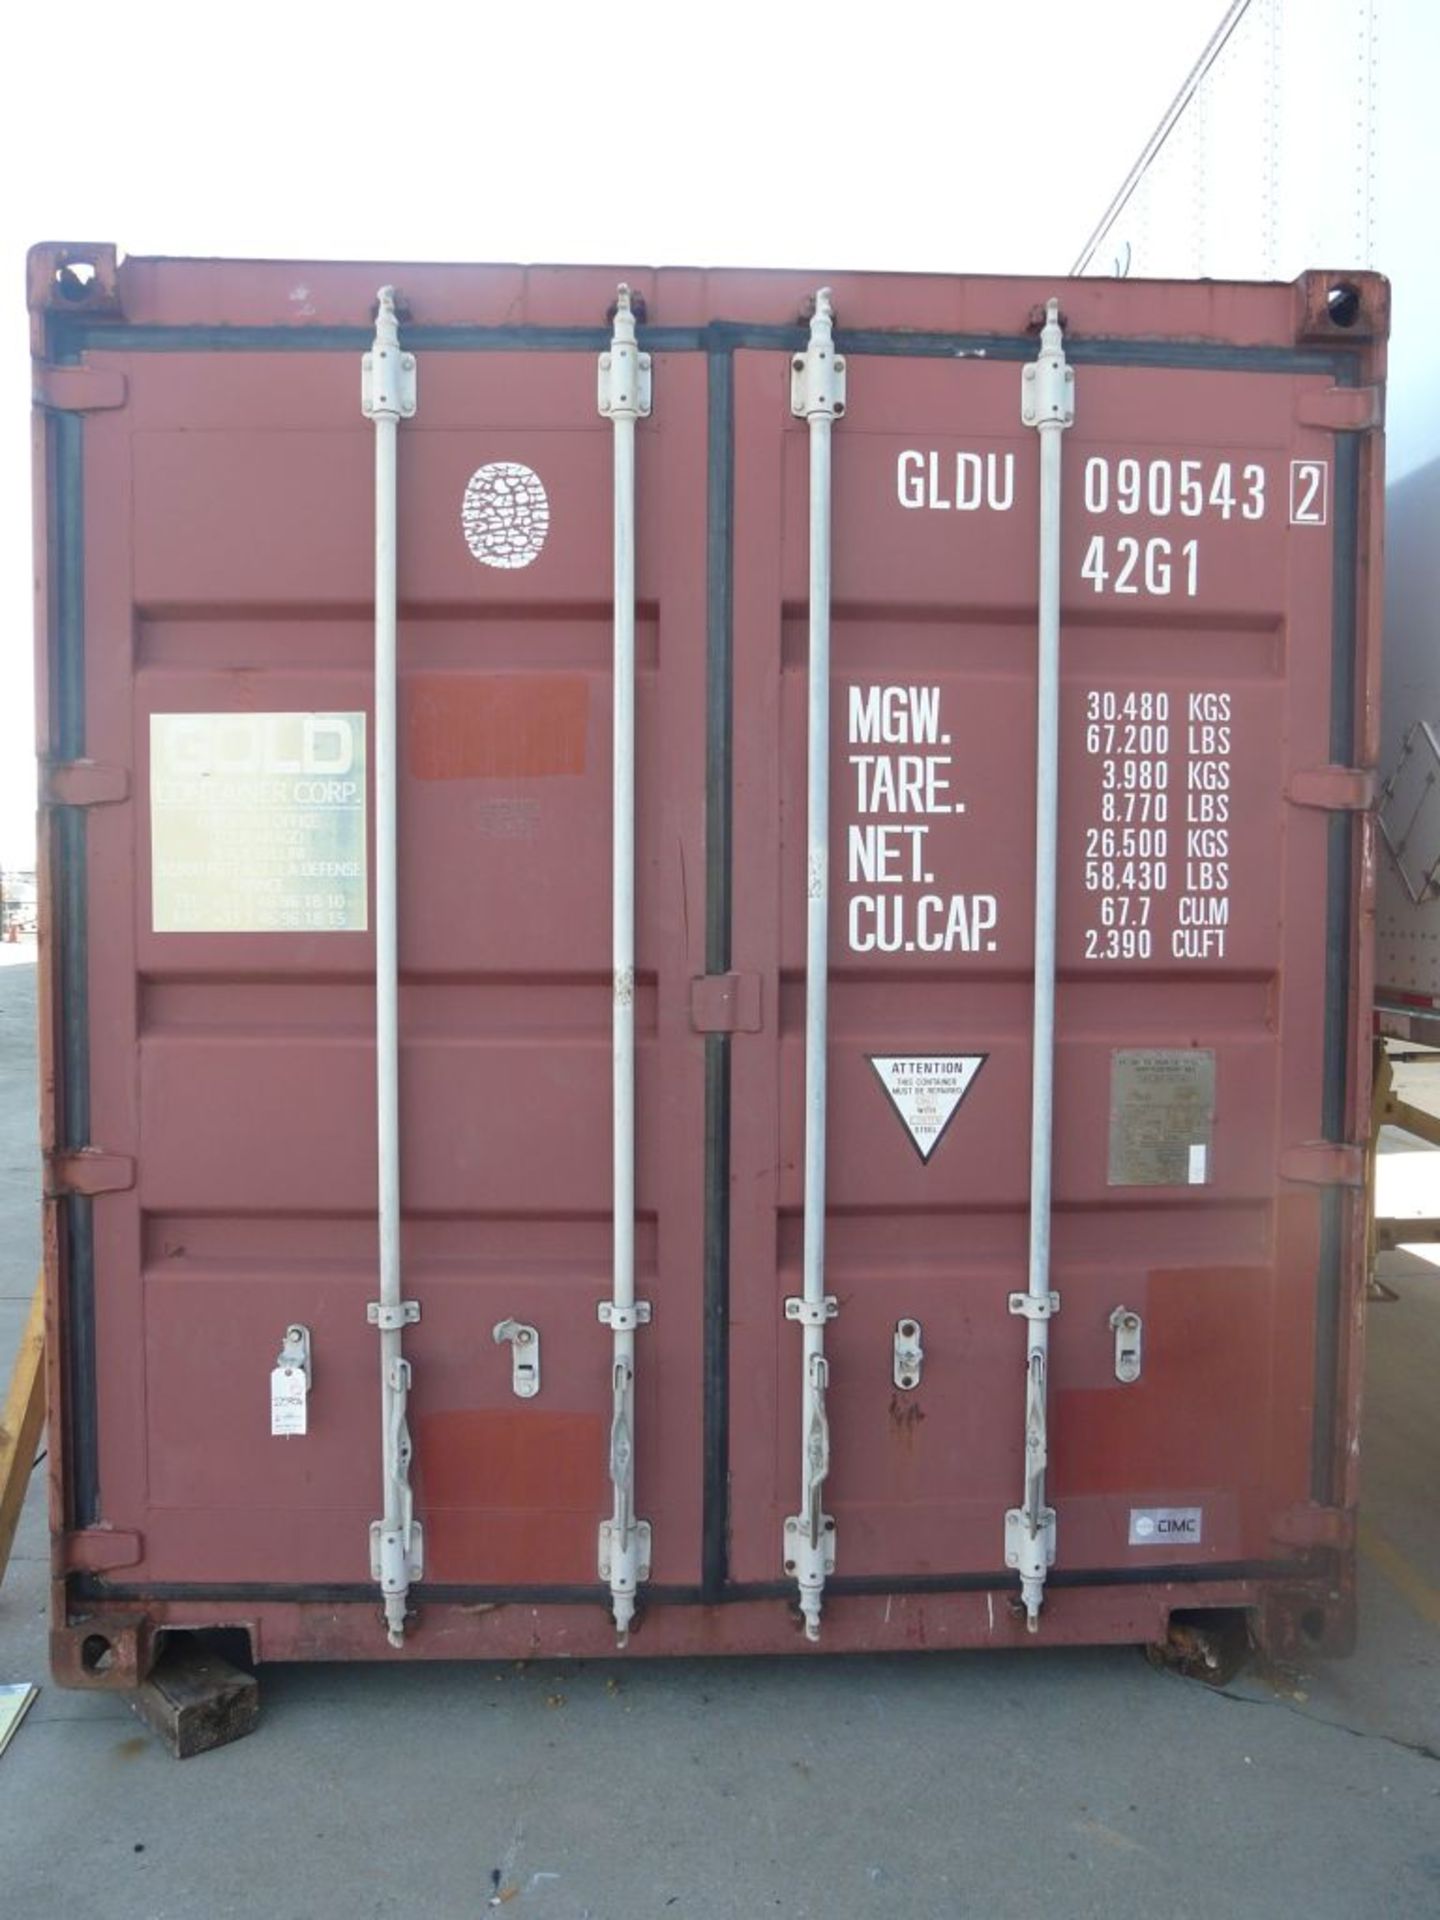 Gold Container Corp. 40' Shipping Container|ID No. G1DU090543-2; Mfg. 5/1998; Tag: 225956; Lot - Image 3 of 6